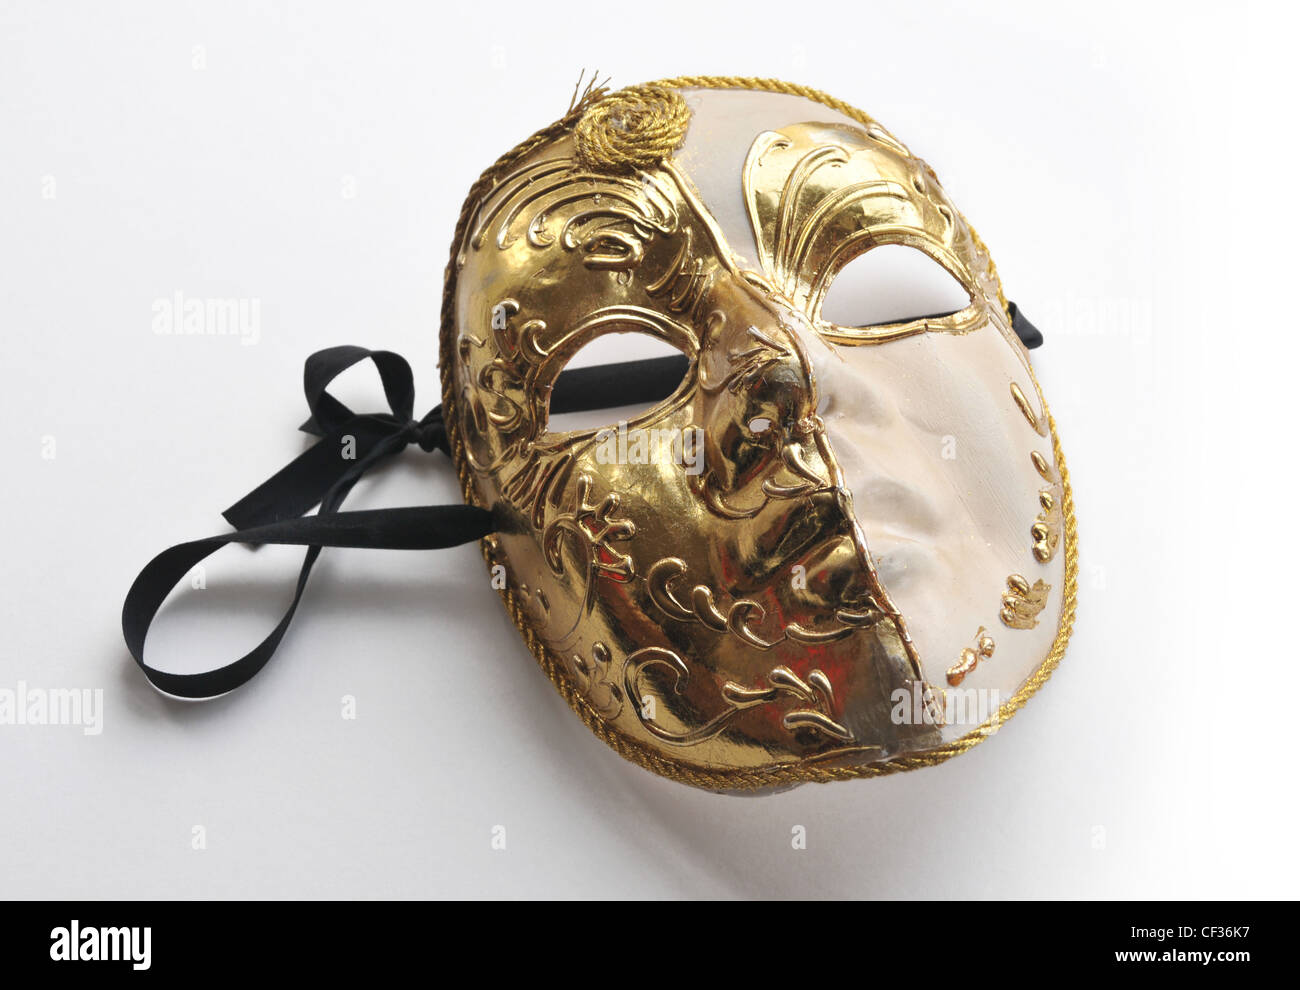 A gold coloured / colored theatrical mask . Stock Photo